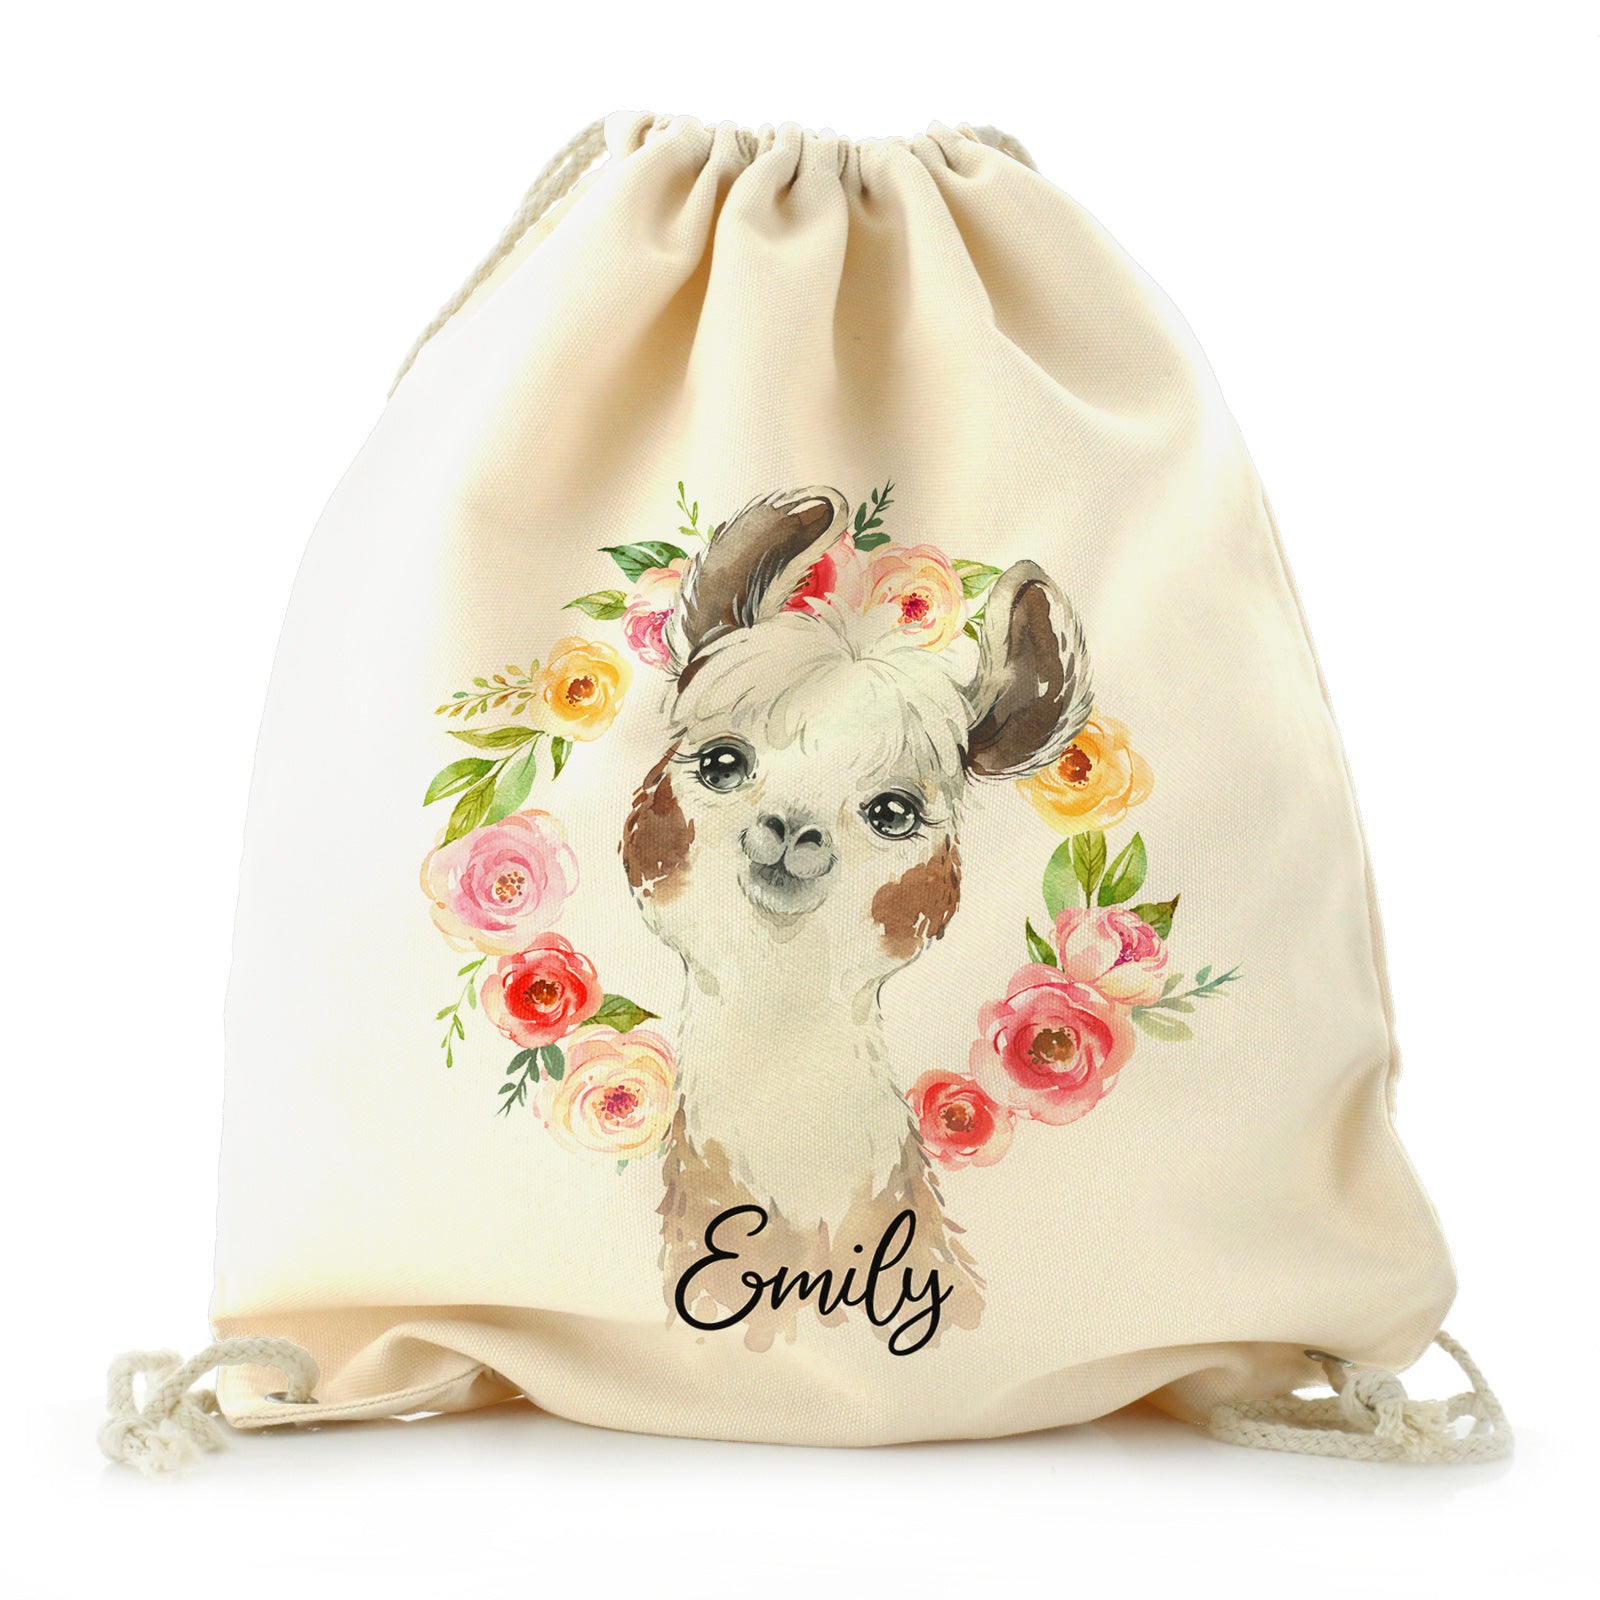 Personalised Canvas Drawstring Backpack with Brown and White Alpaca Multicolour Flower Wreath and Cute Text